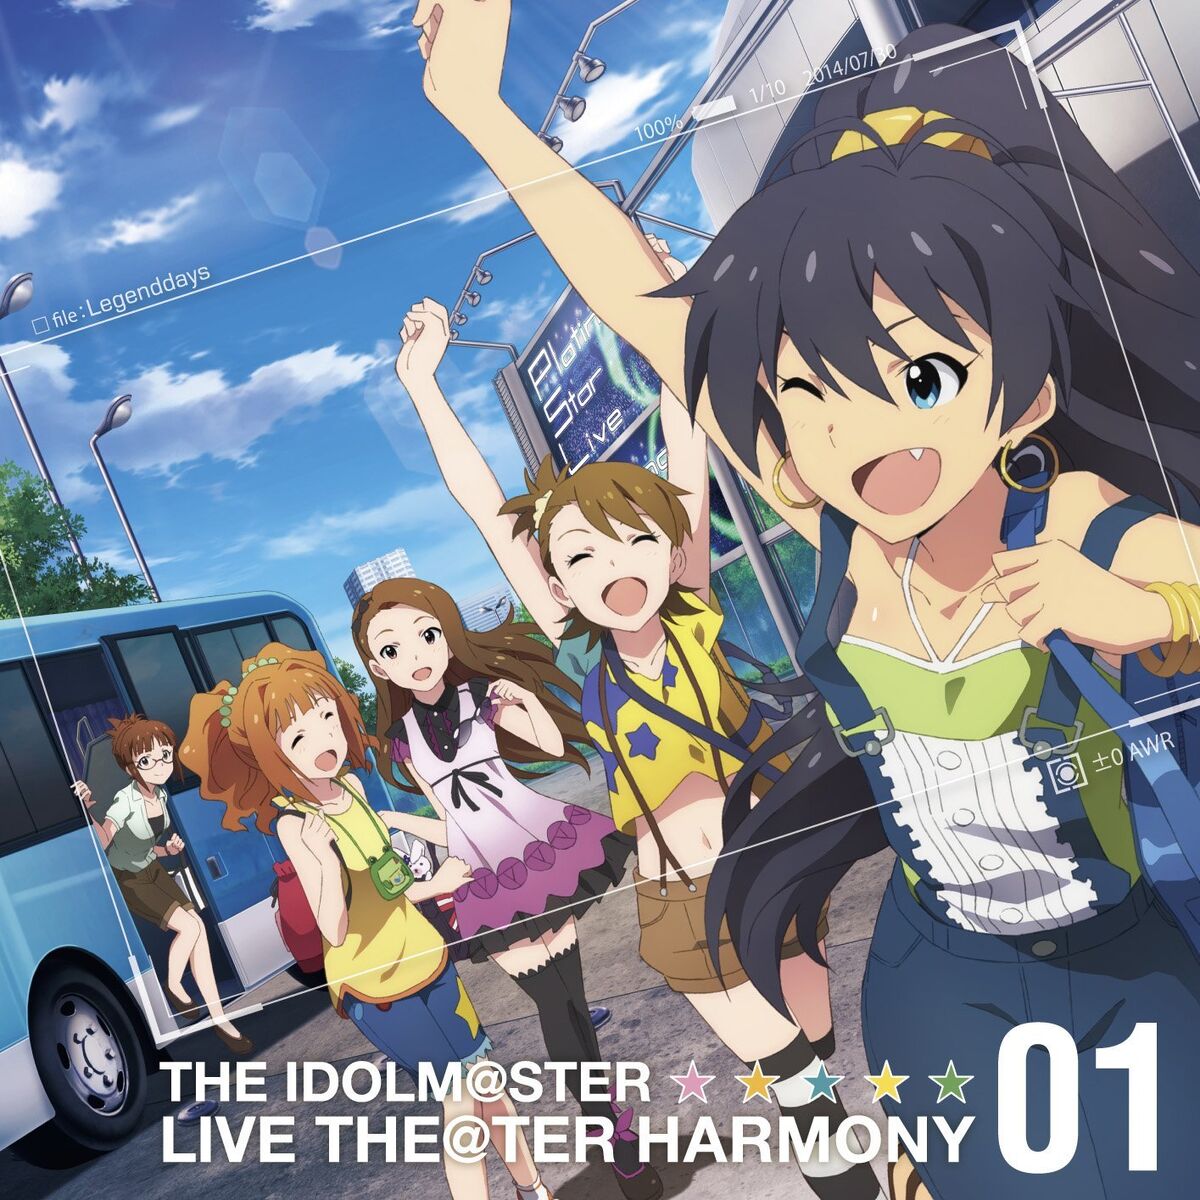 THE IDOLM@STER LIVE THE@TER HARMONY 01 | THE iDOLM@STER: Million Live! Wiki  | Fandom - アニメ